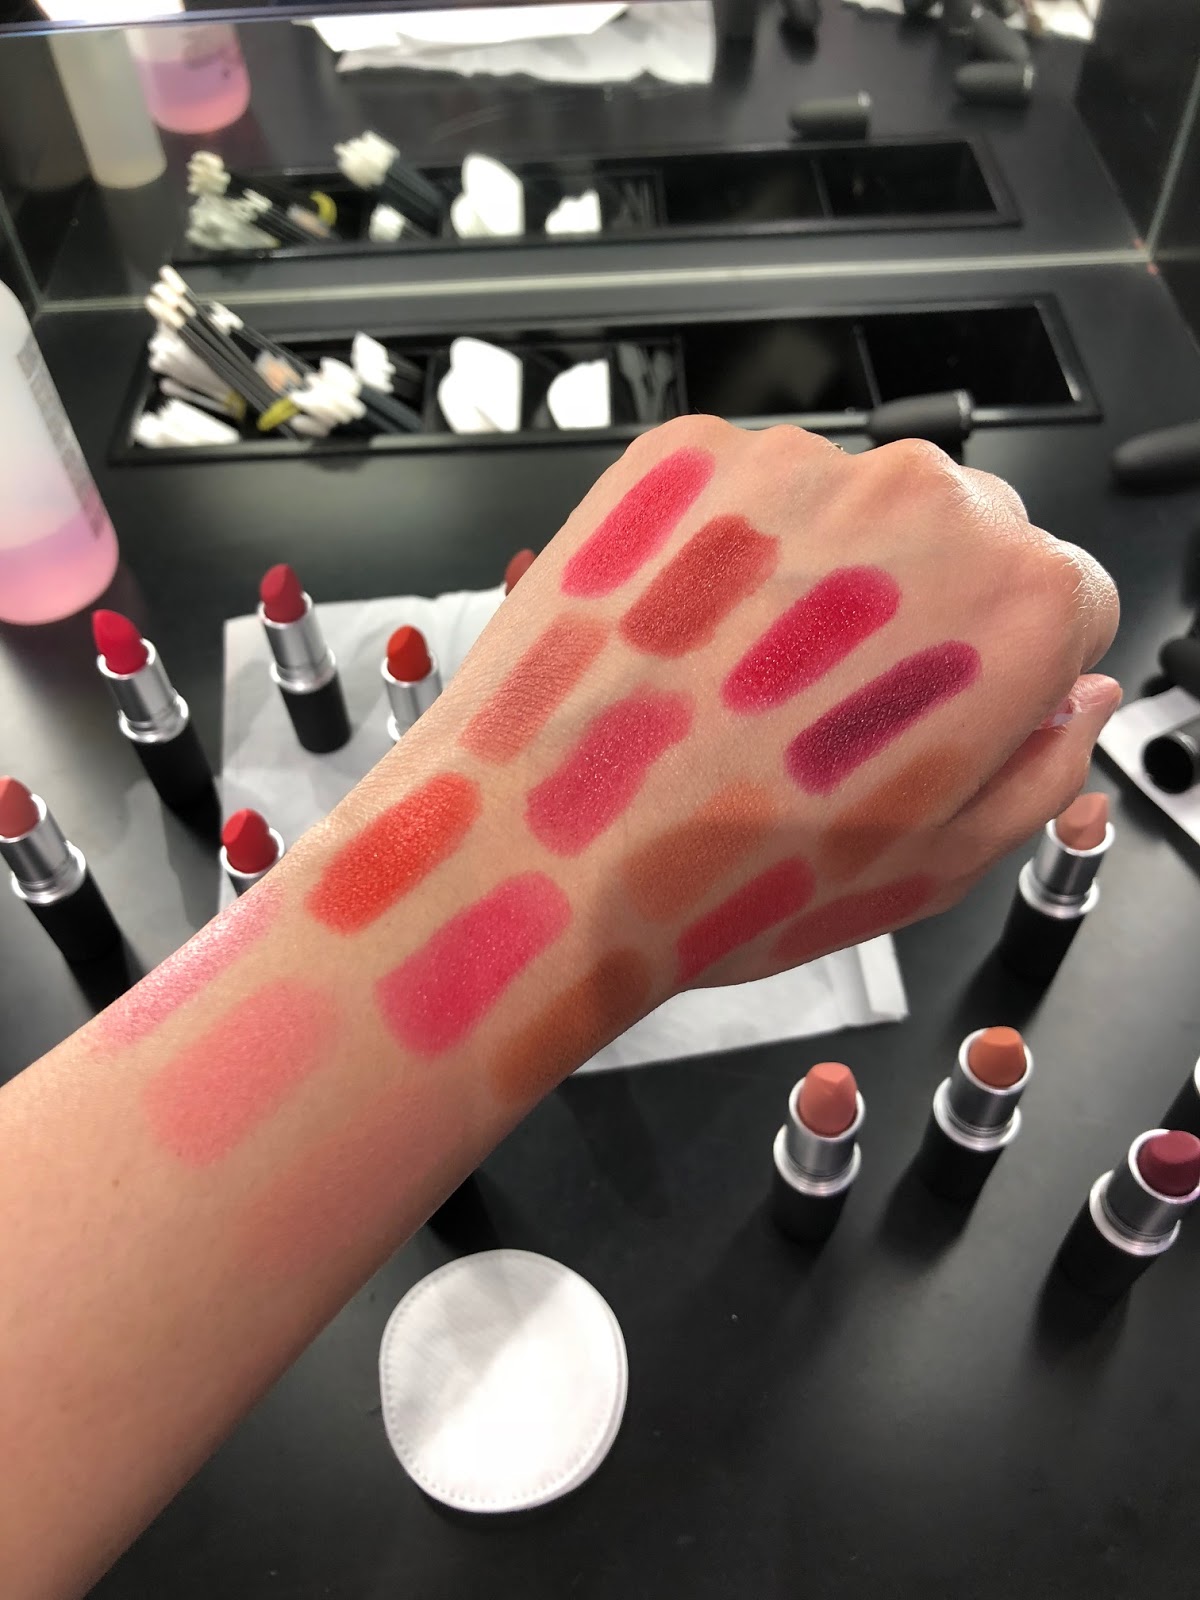 Mac Cosmetics Powder Kiss Lipstick In Devoted To Chilli Review And Swatch 